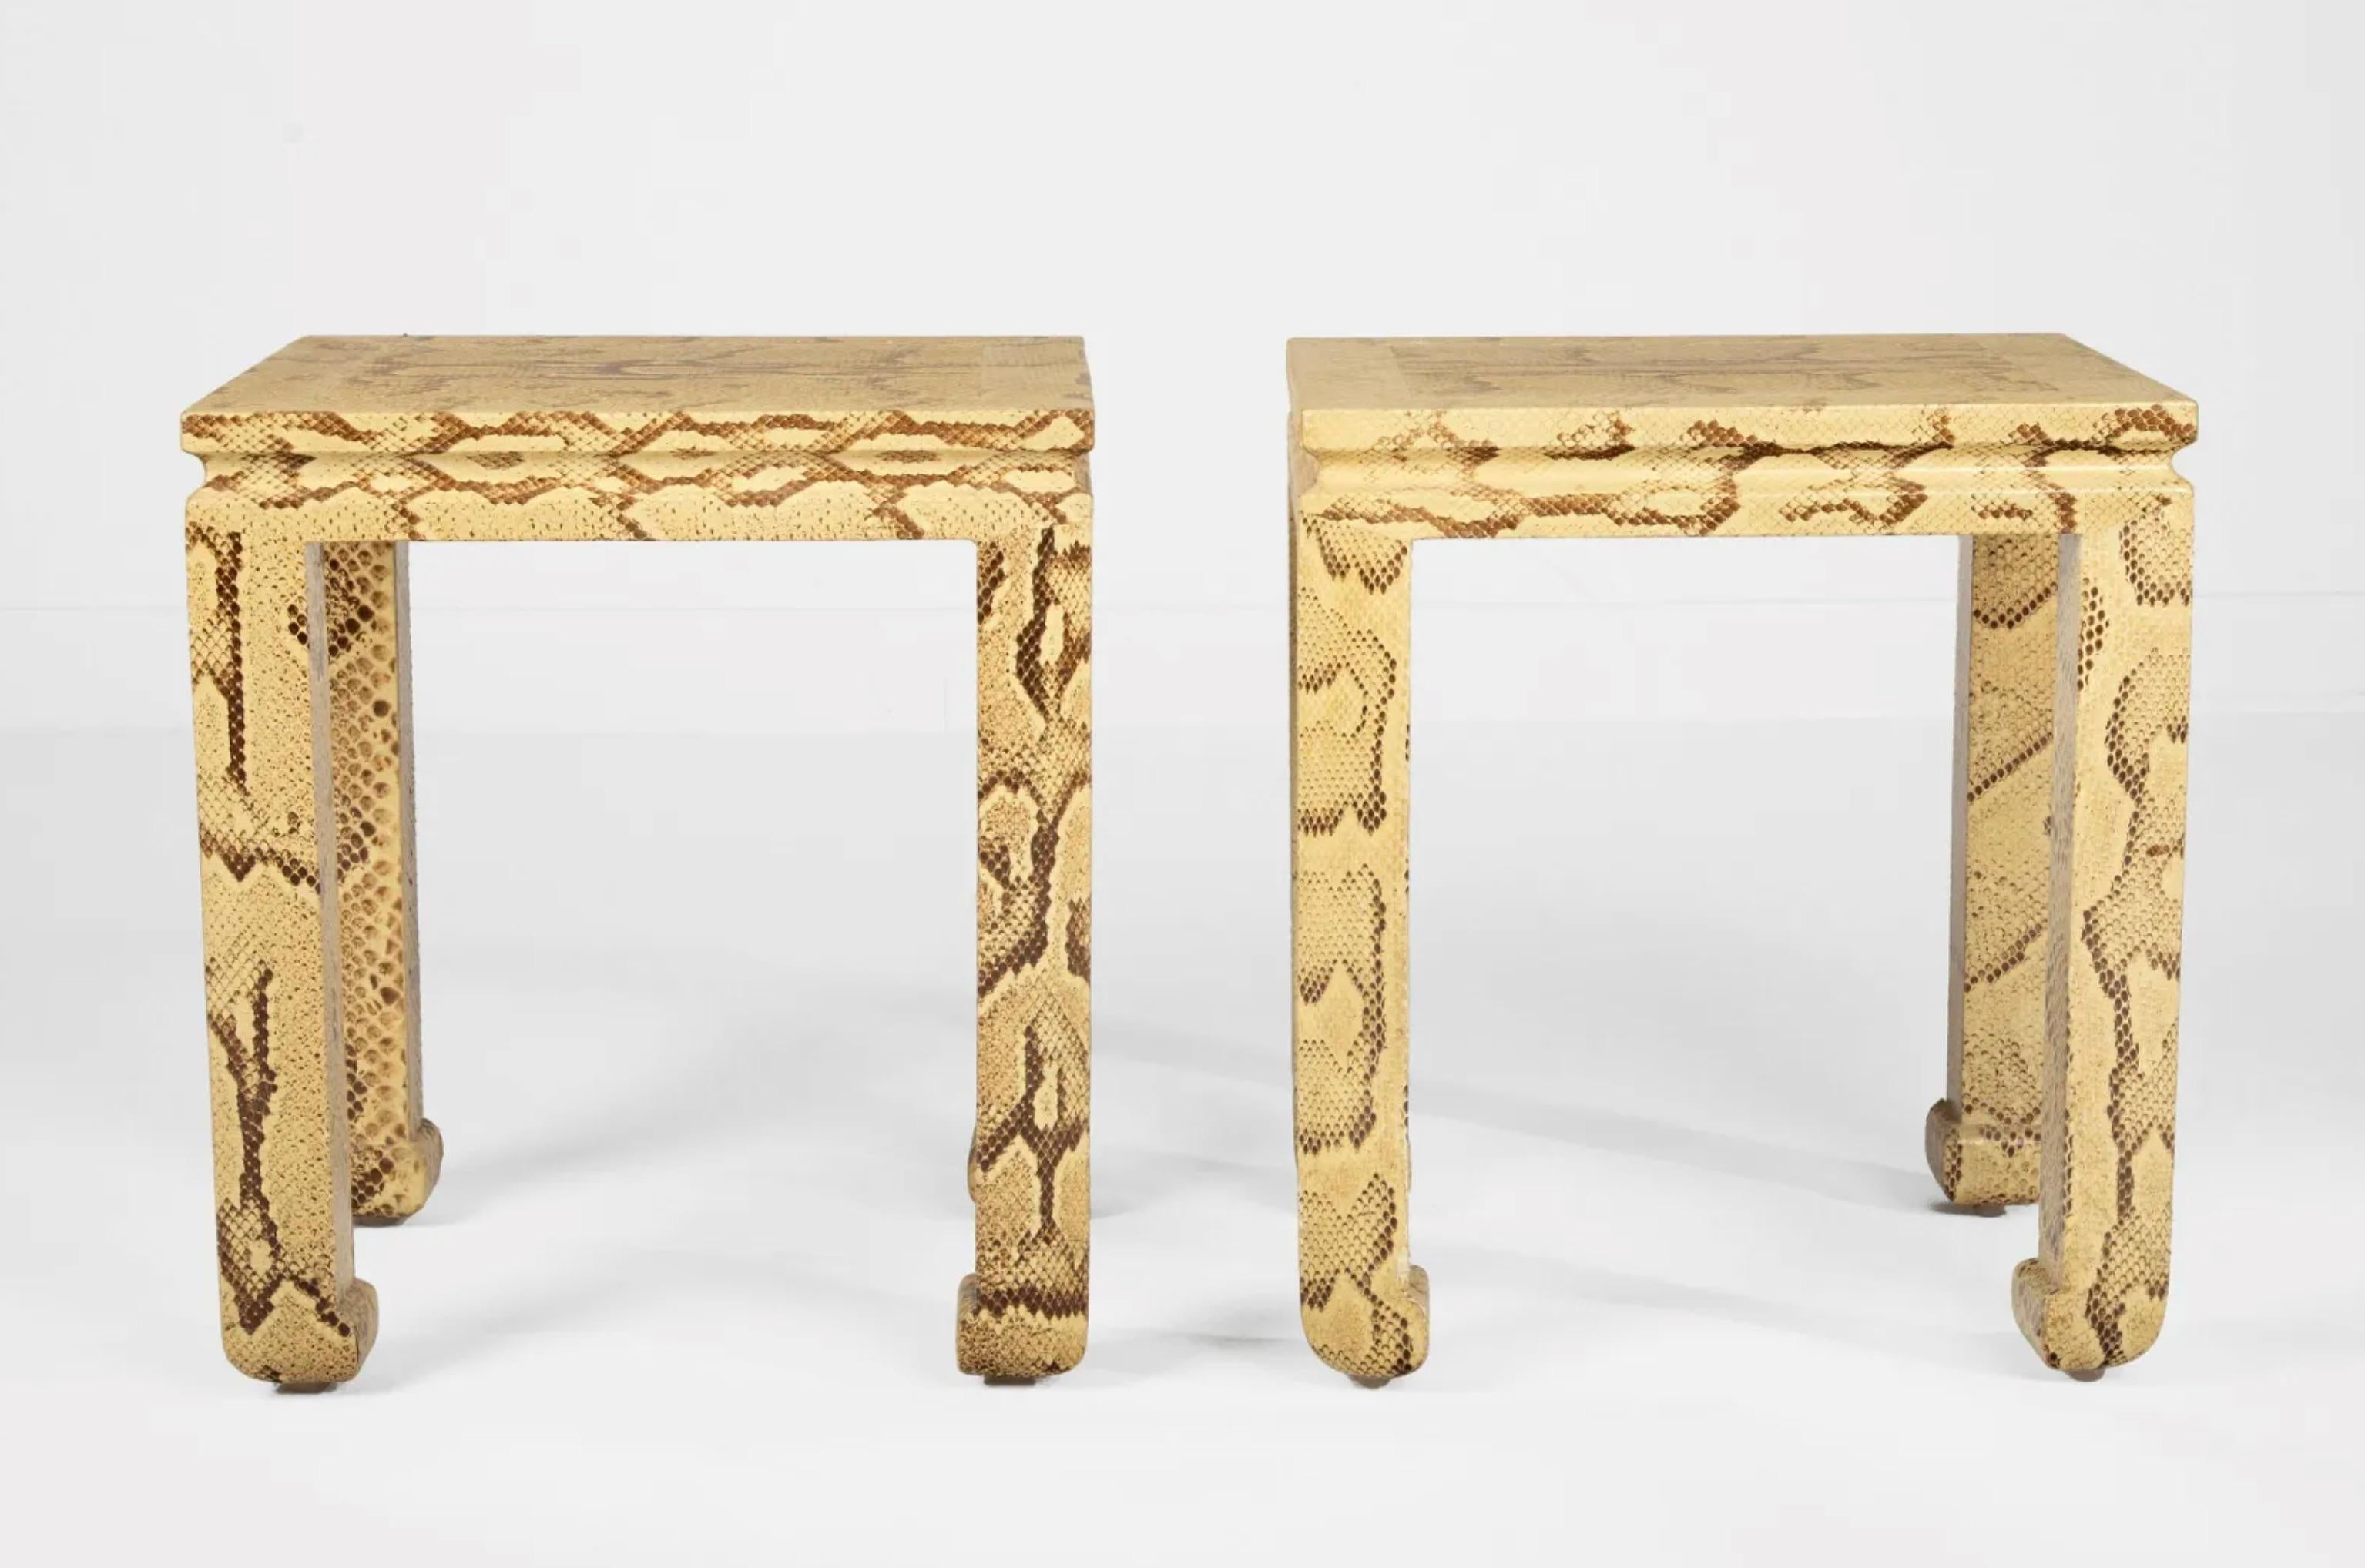 Pair of Karl Springer end tables
Python skin over wood
Diminutive size and classic form.